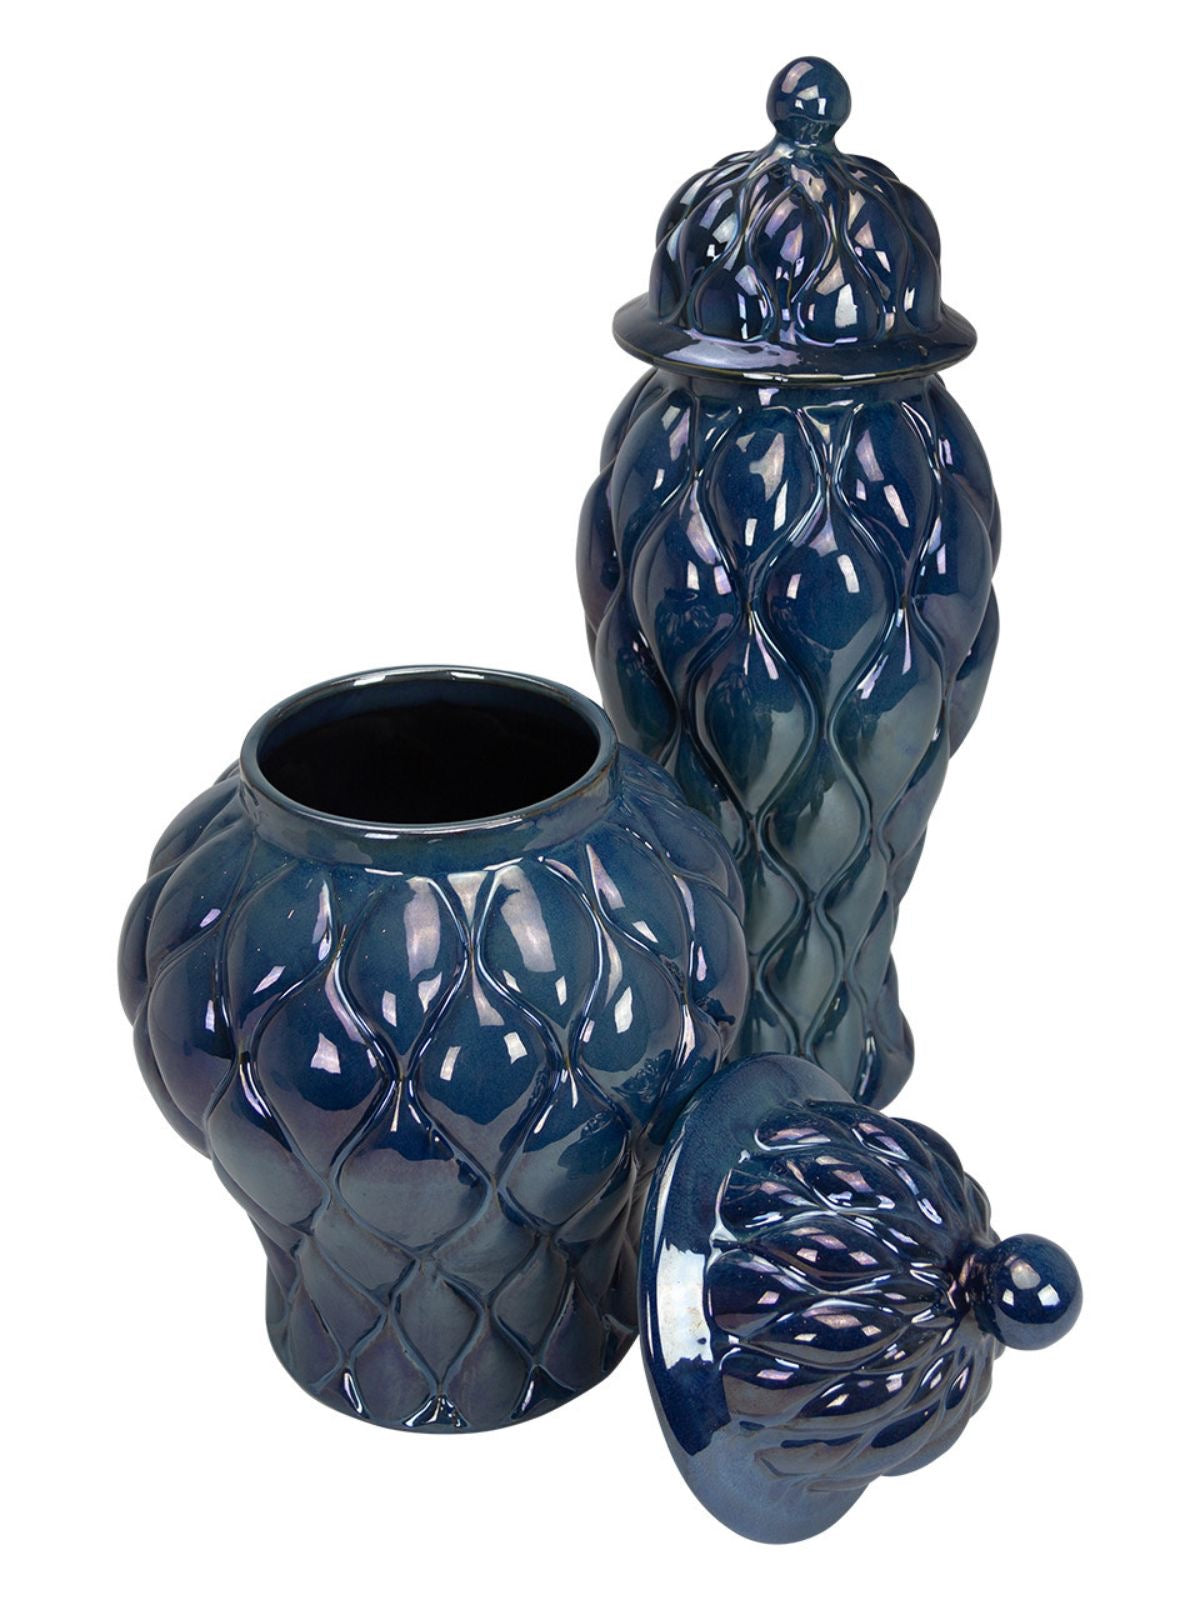 Sapphire Blue Ceramic Ginger Jar with Quilt Pattern and Lids in 2 Sizes Sold KYA Home Decor.